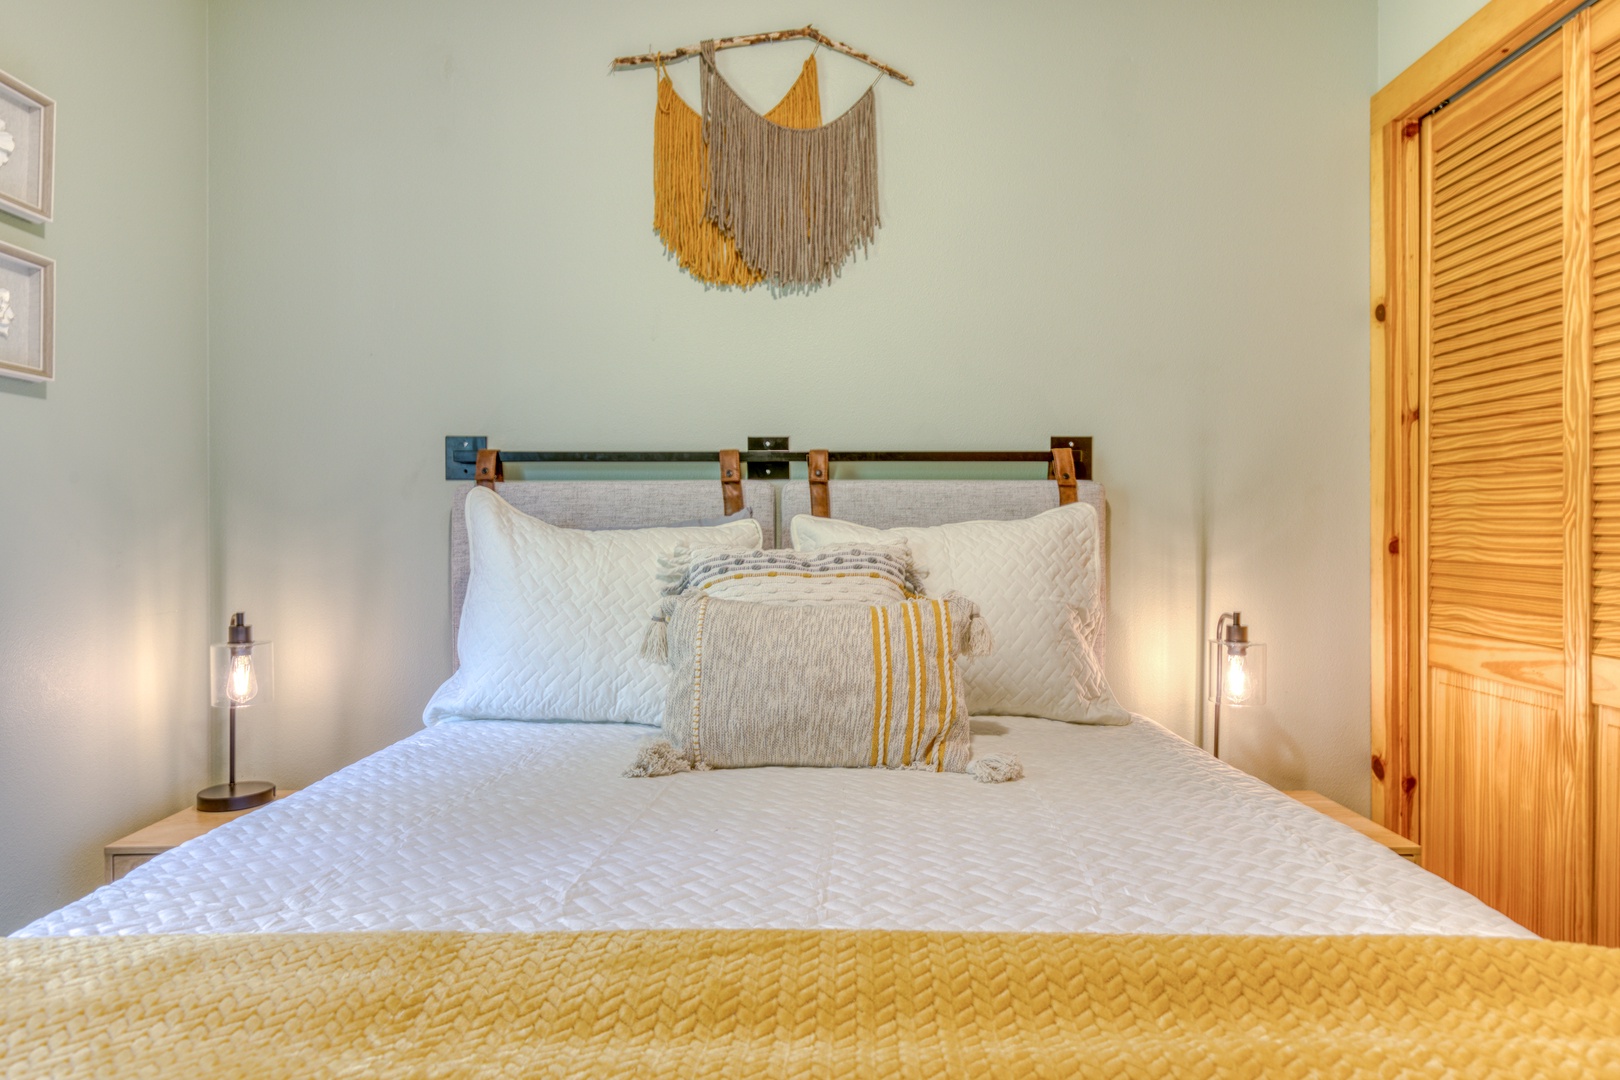 Brightwood Vacation Rentals, Riverside Retreat - This bedroom is furnished with a queen bed